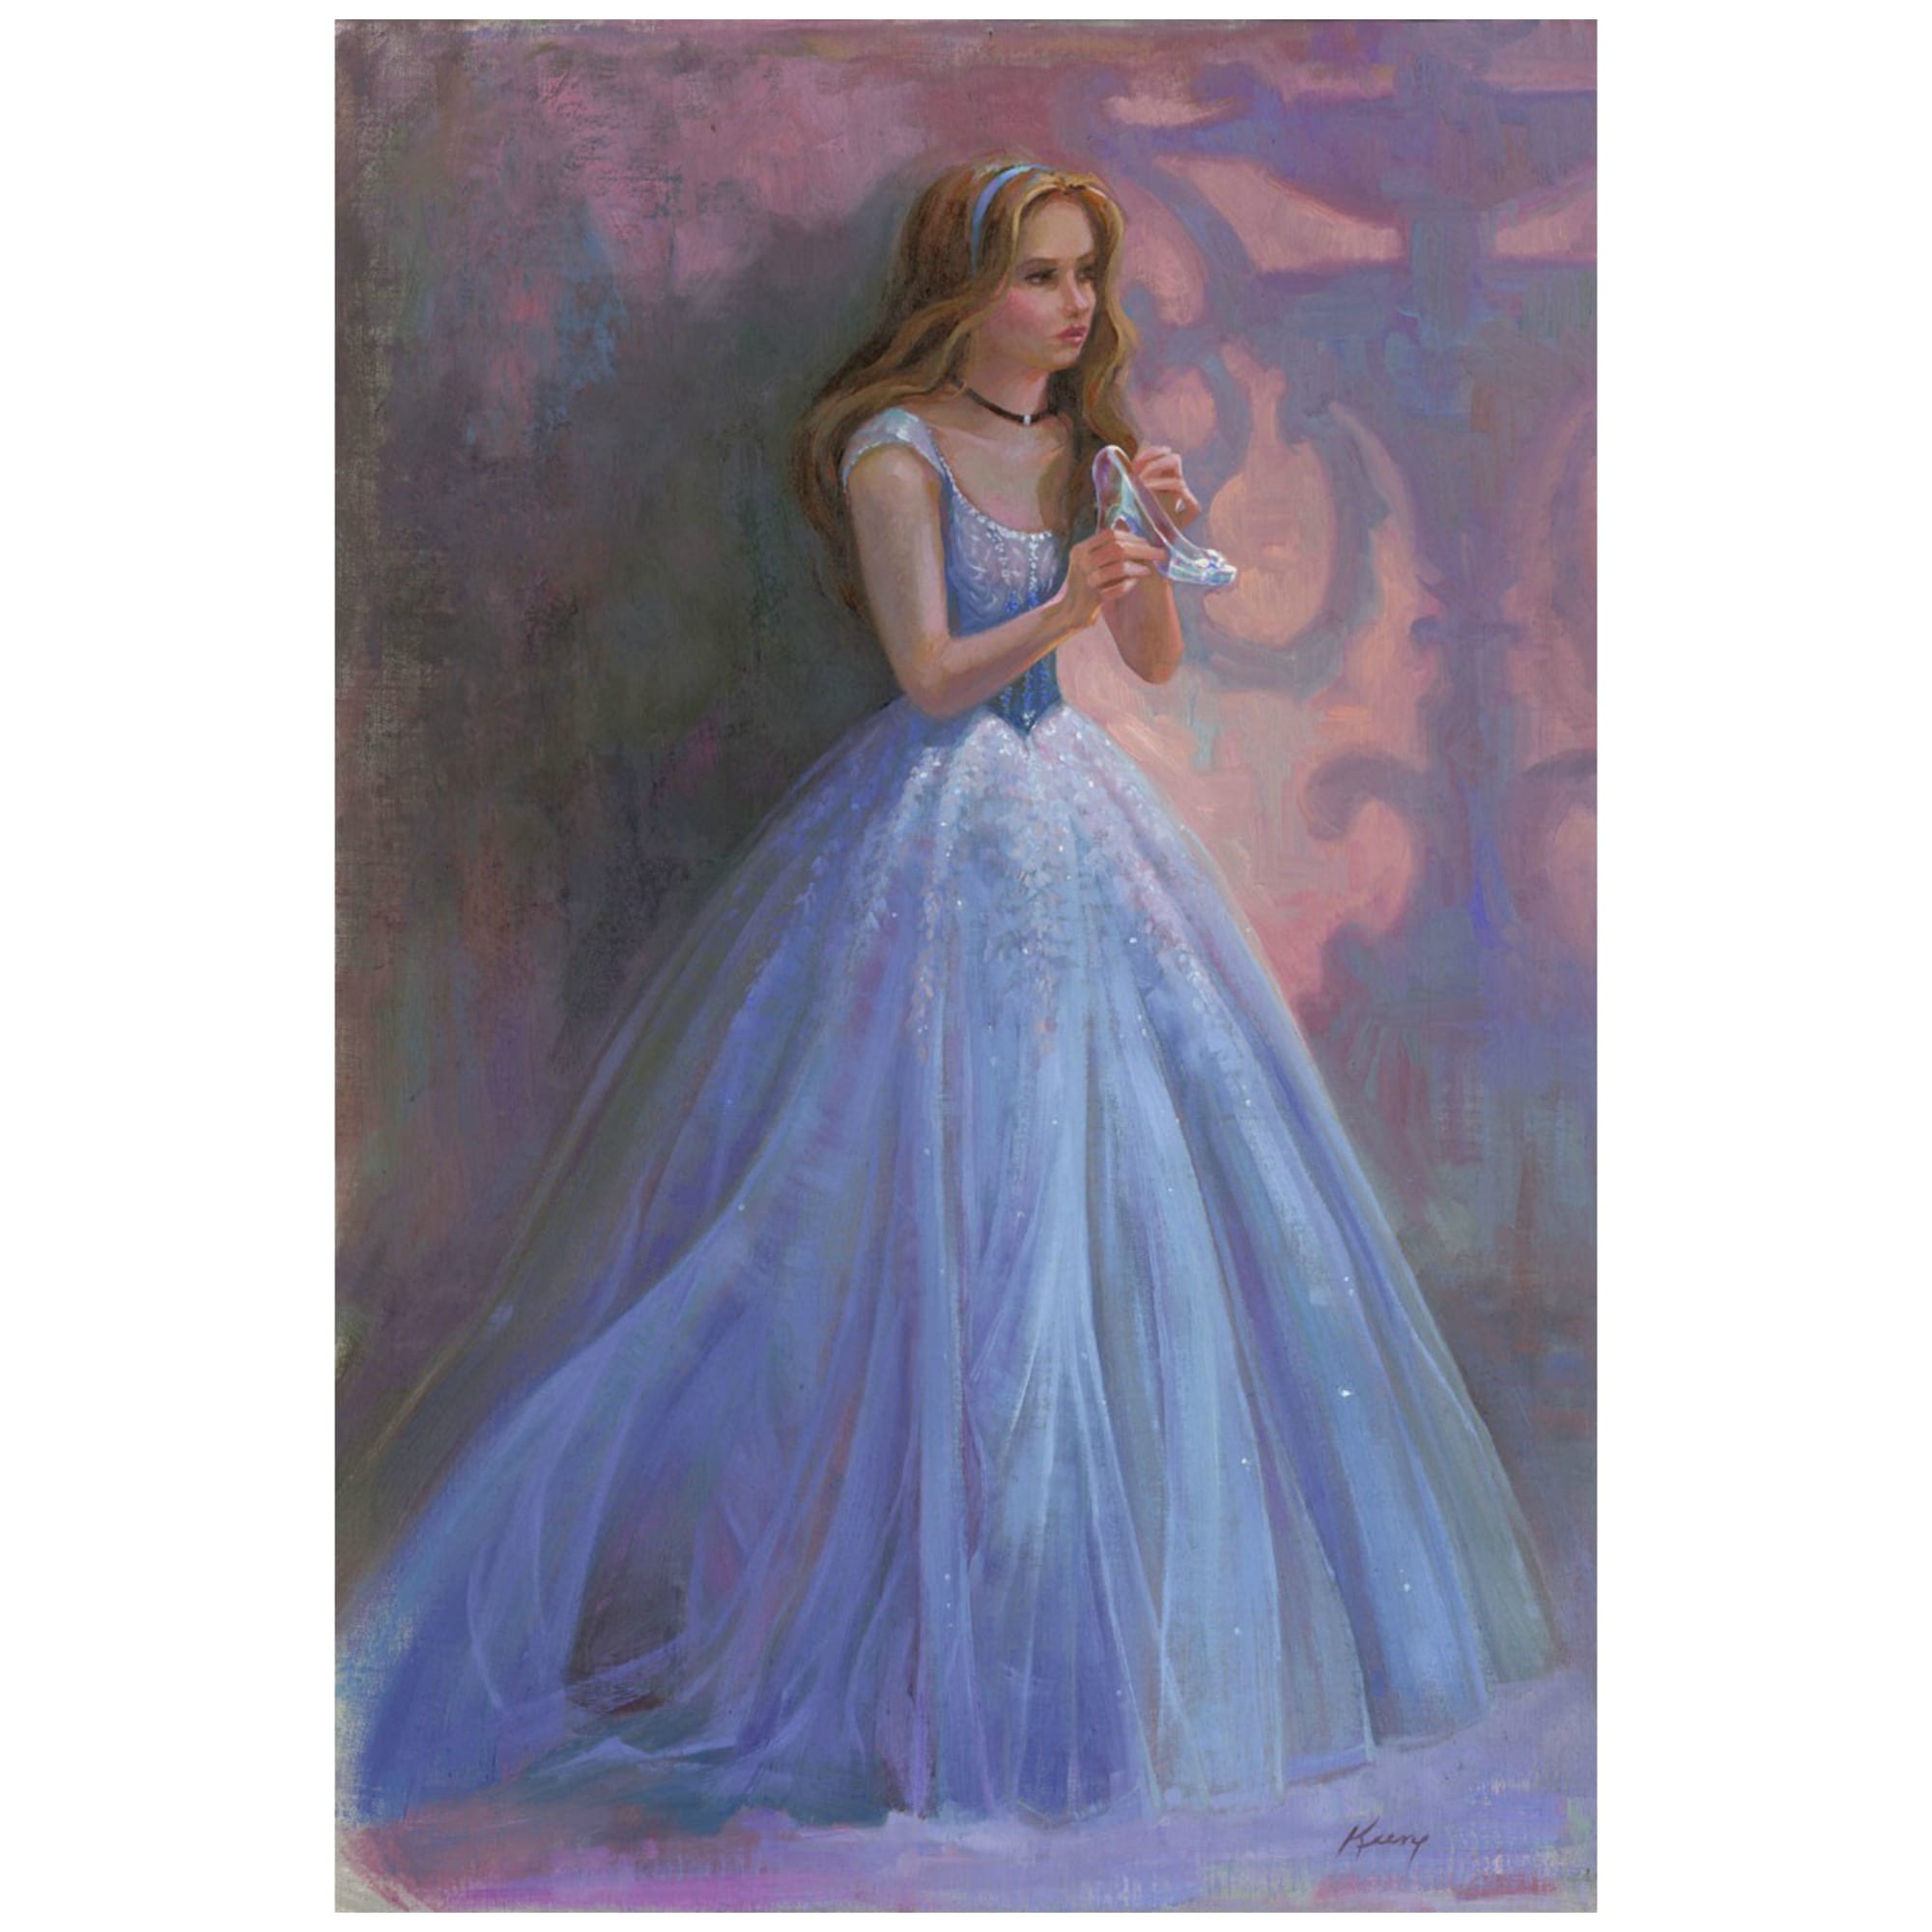 Glass Slipper Original Acrylic Painting on Gallery Wrapped